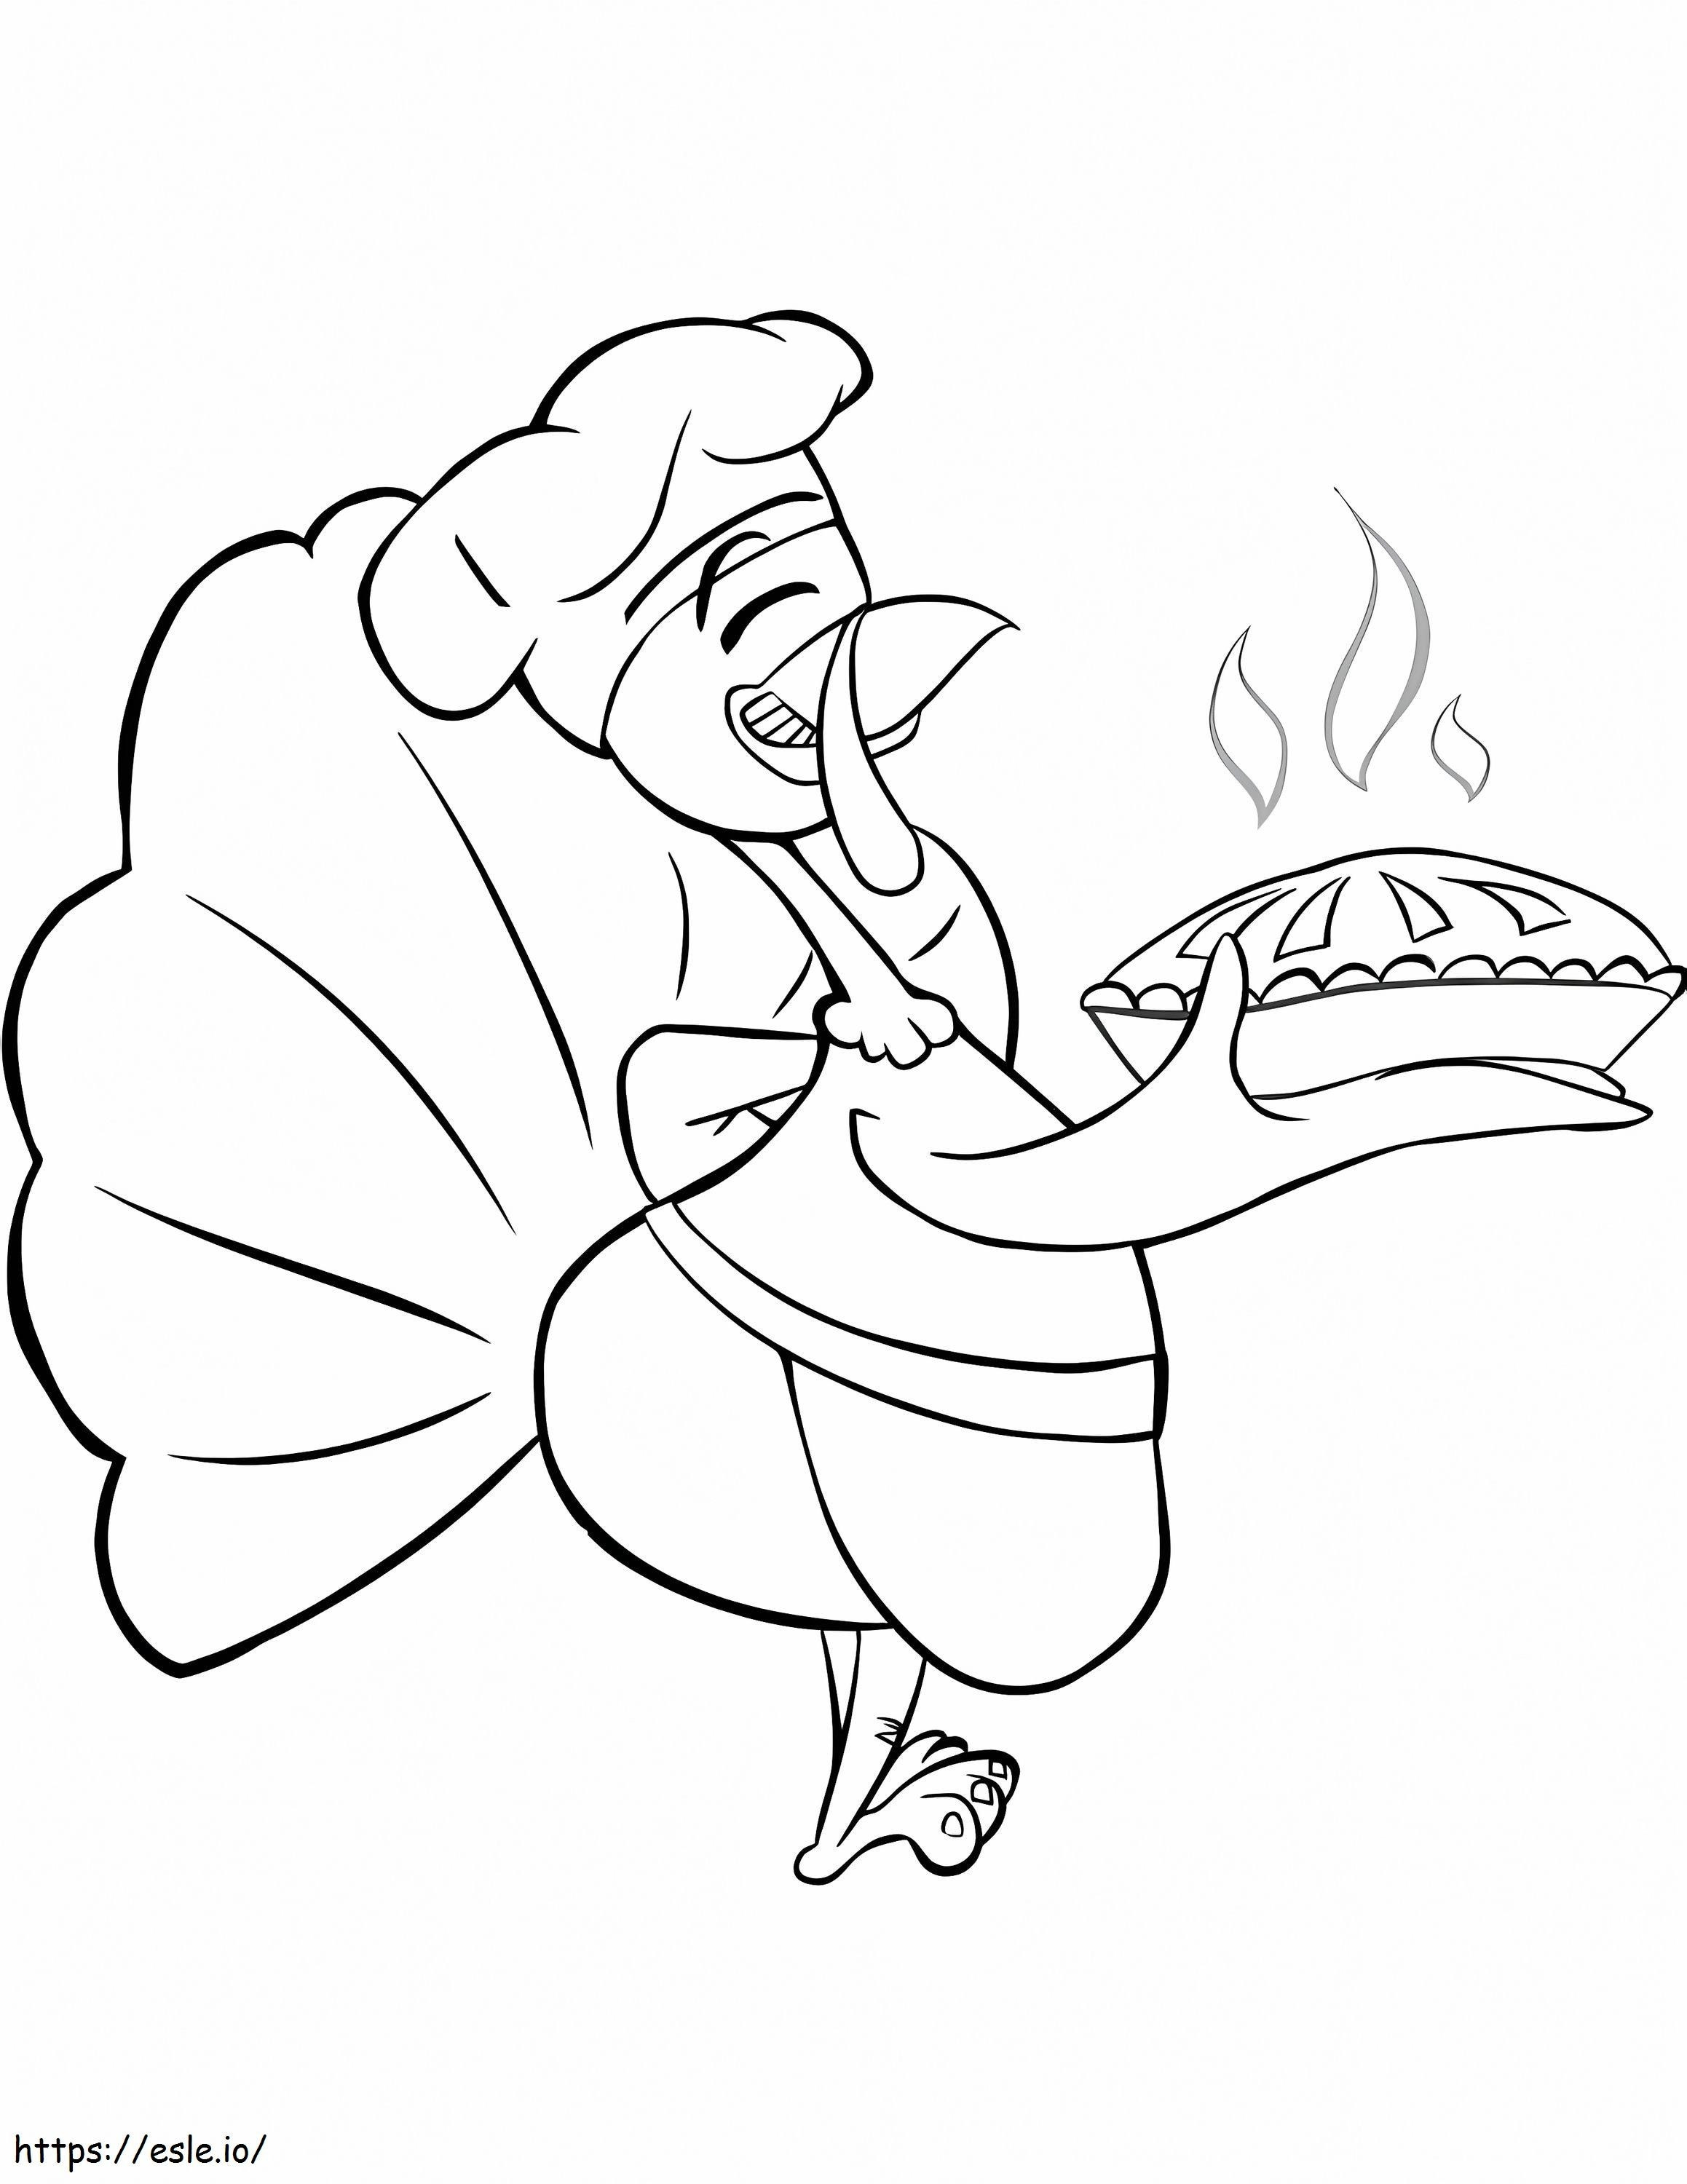 Turkey Cook Making Cake coloring page